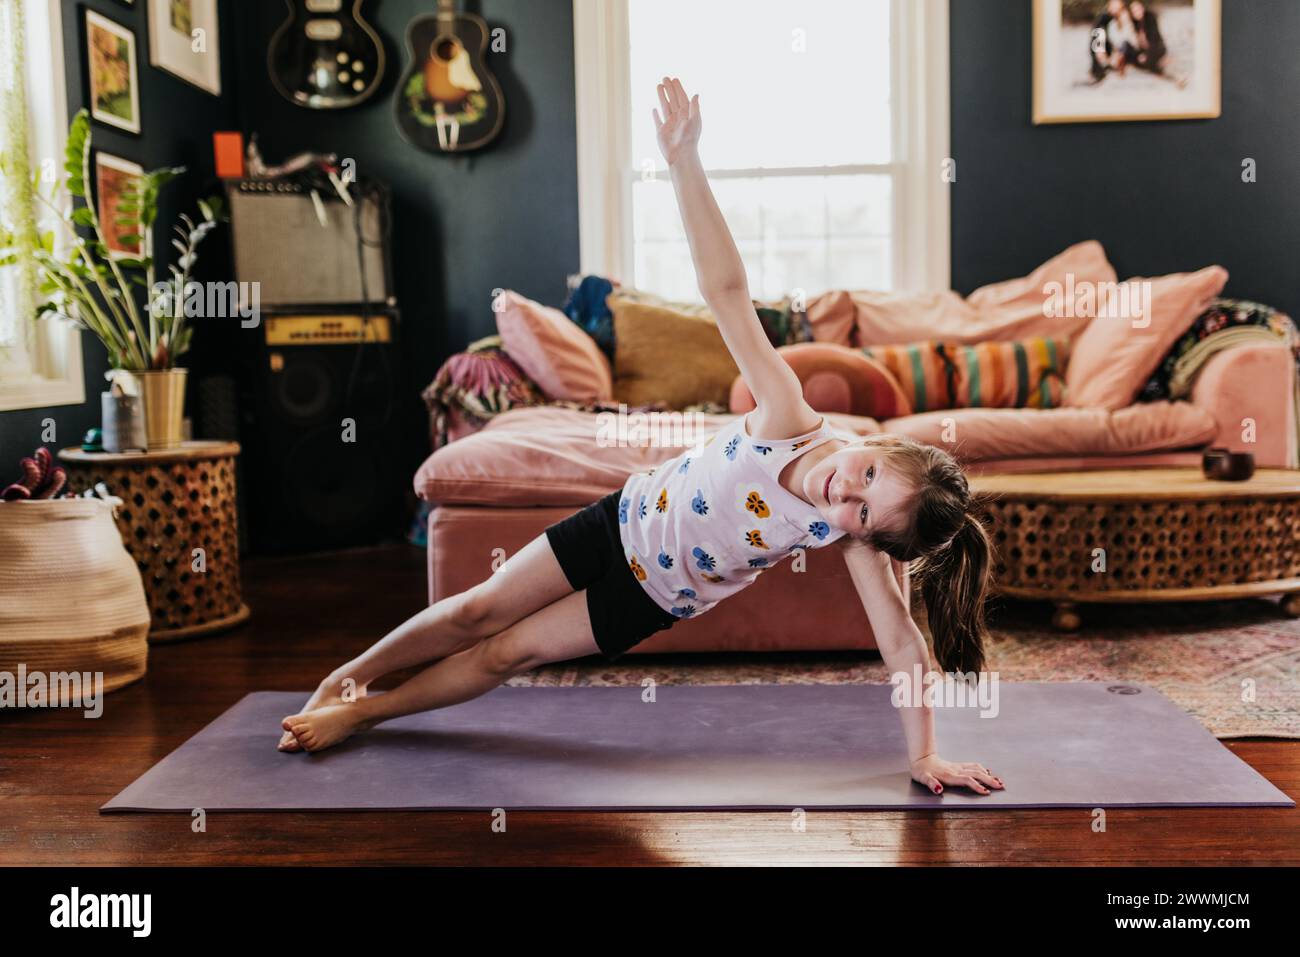 Young girl does side plank on purple yoga mat in living room Stock Photo